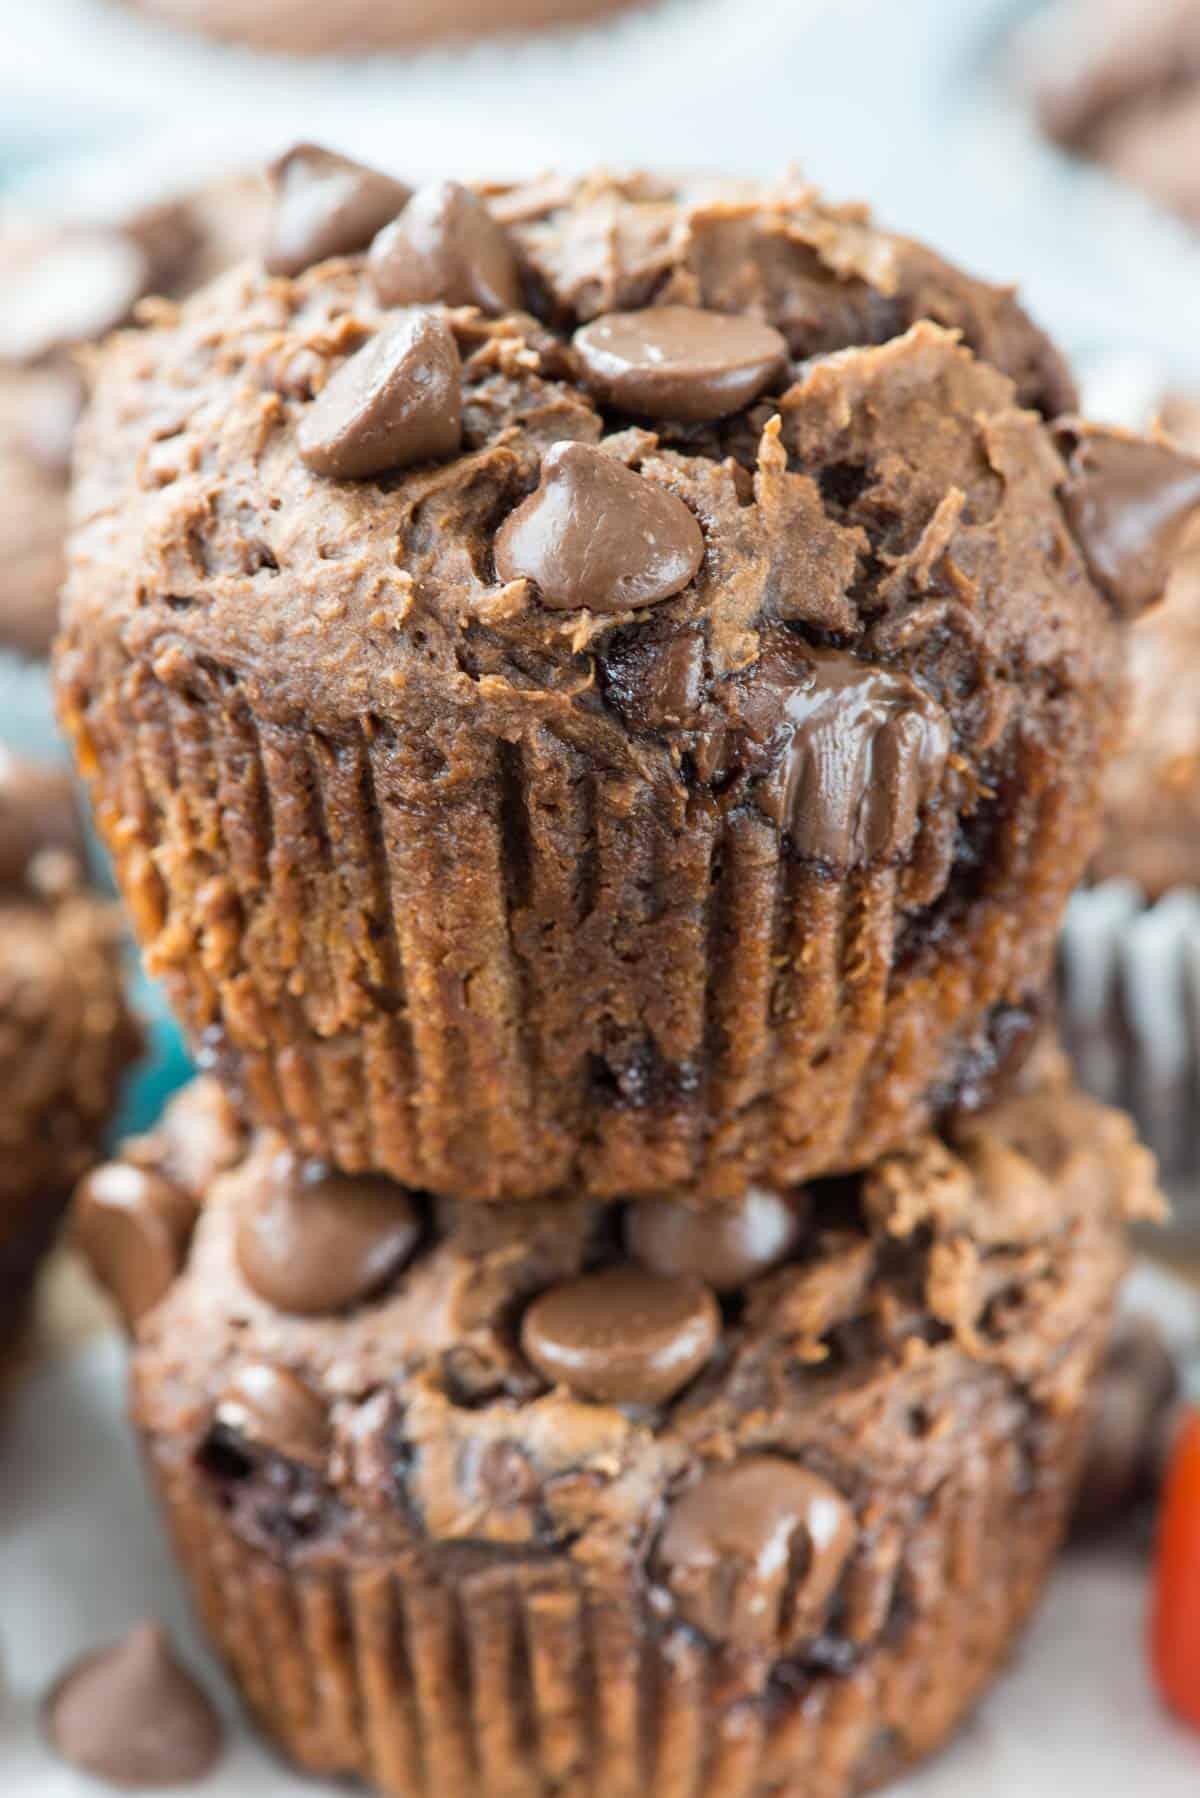 stacked chocolate muffins with chocolate chips baked in.